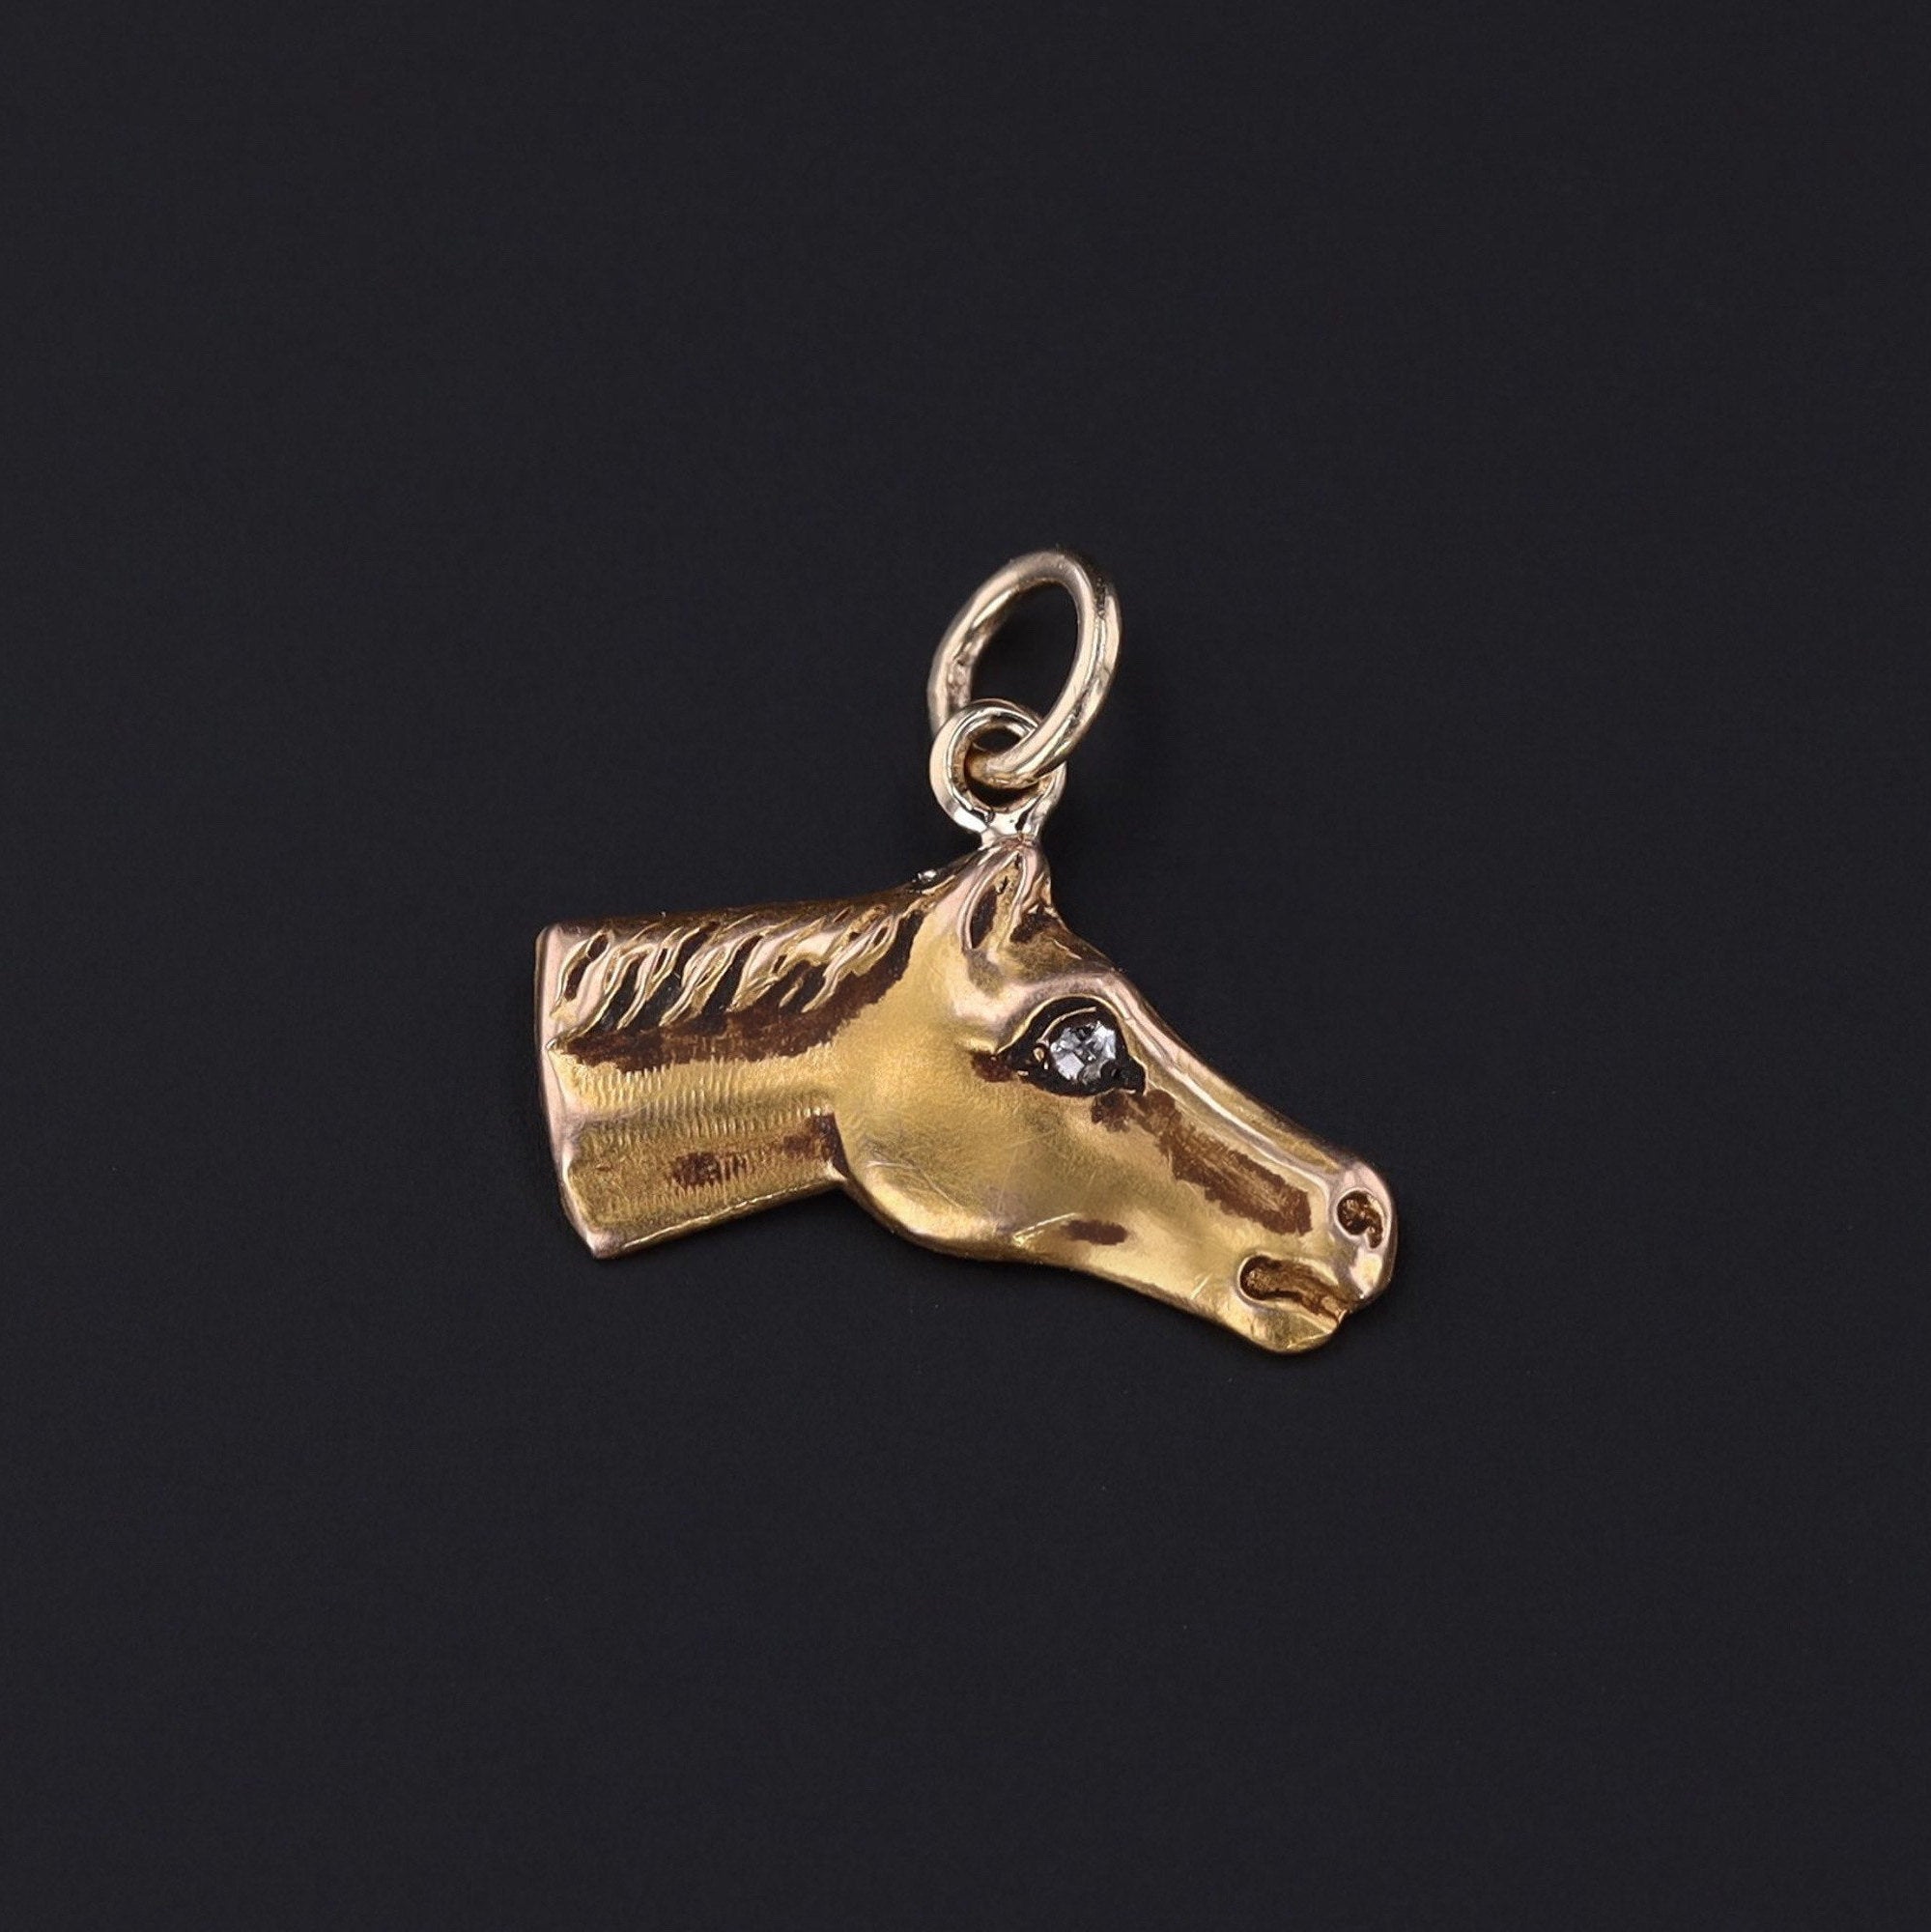 Horse Head Charm or Pendant | 14k Gold Horse Charm | Antique Pin Conversion Charm | Equestrian Gift | 14k Gold Charm